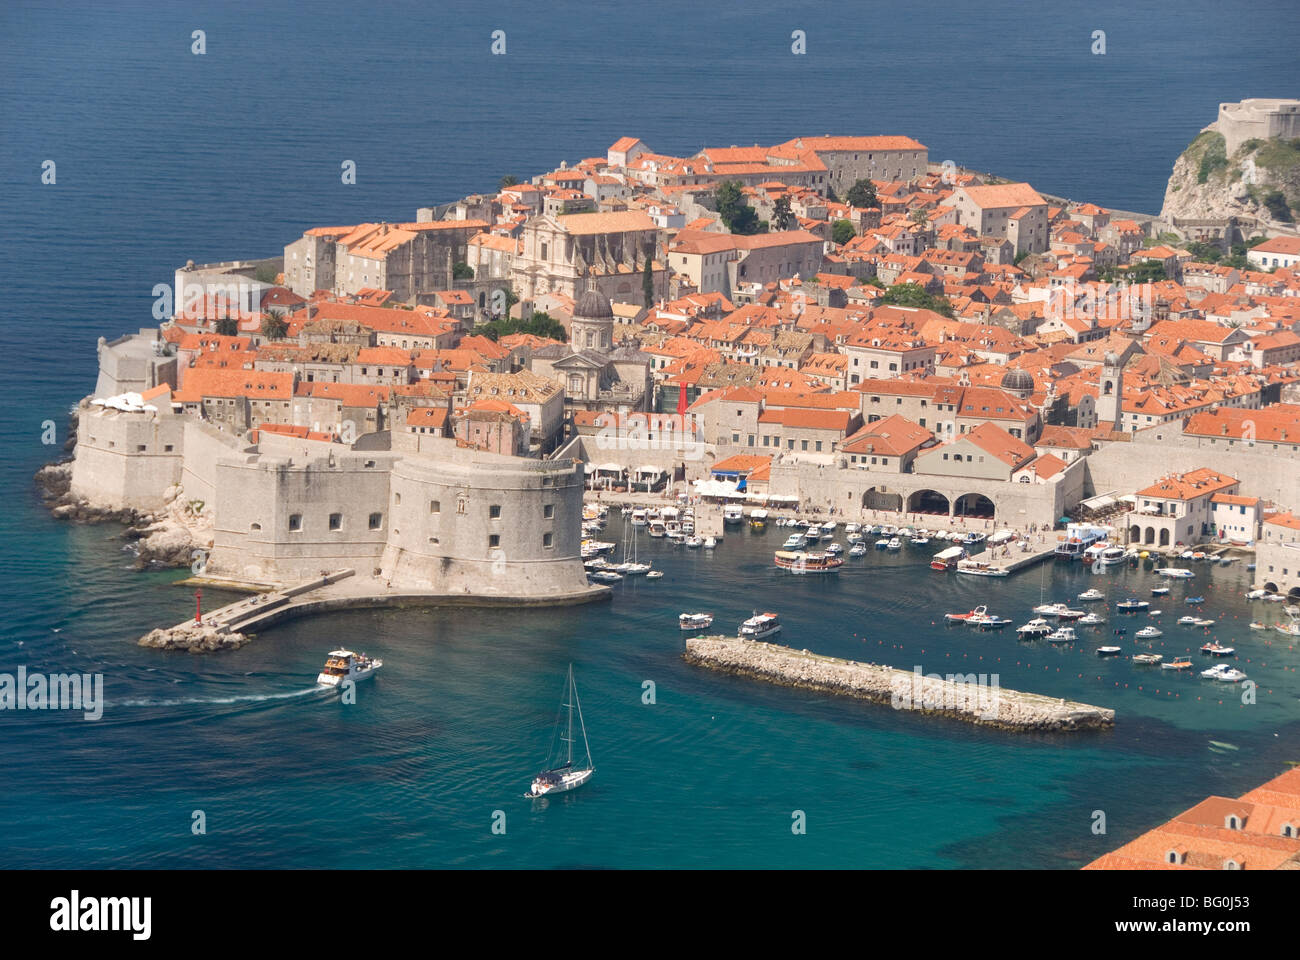 Old Town and Old Port, UNESCO World Heritage Site, seen from the hills to the southeast, Dubrovnik, Croatia, Europe Stock Photo